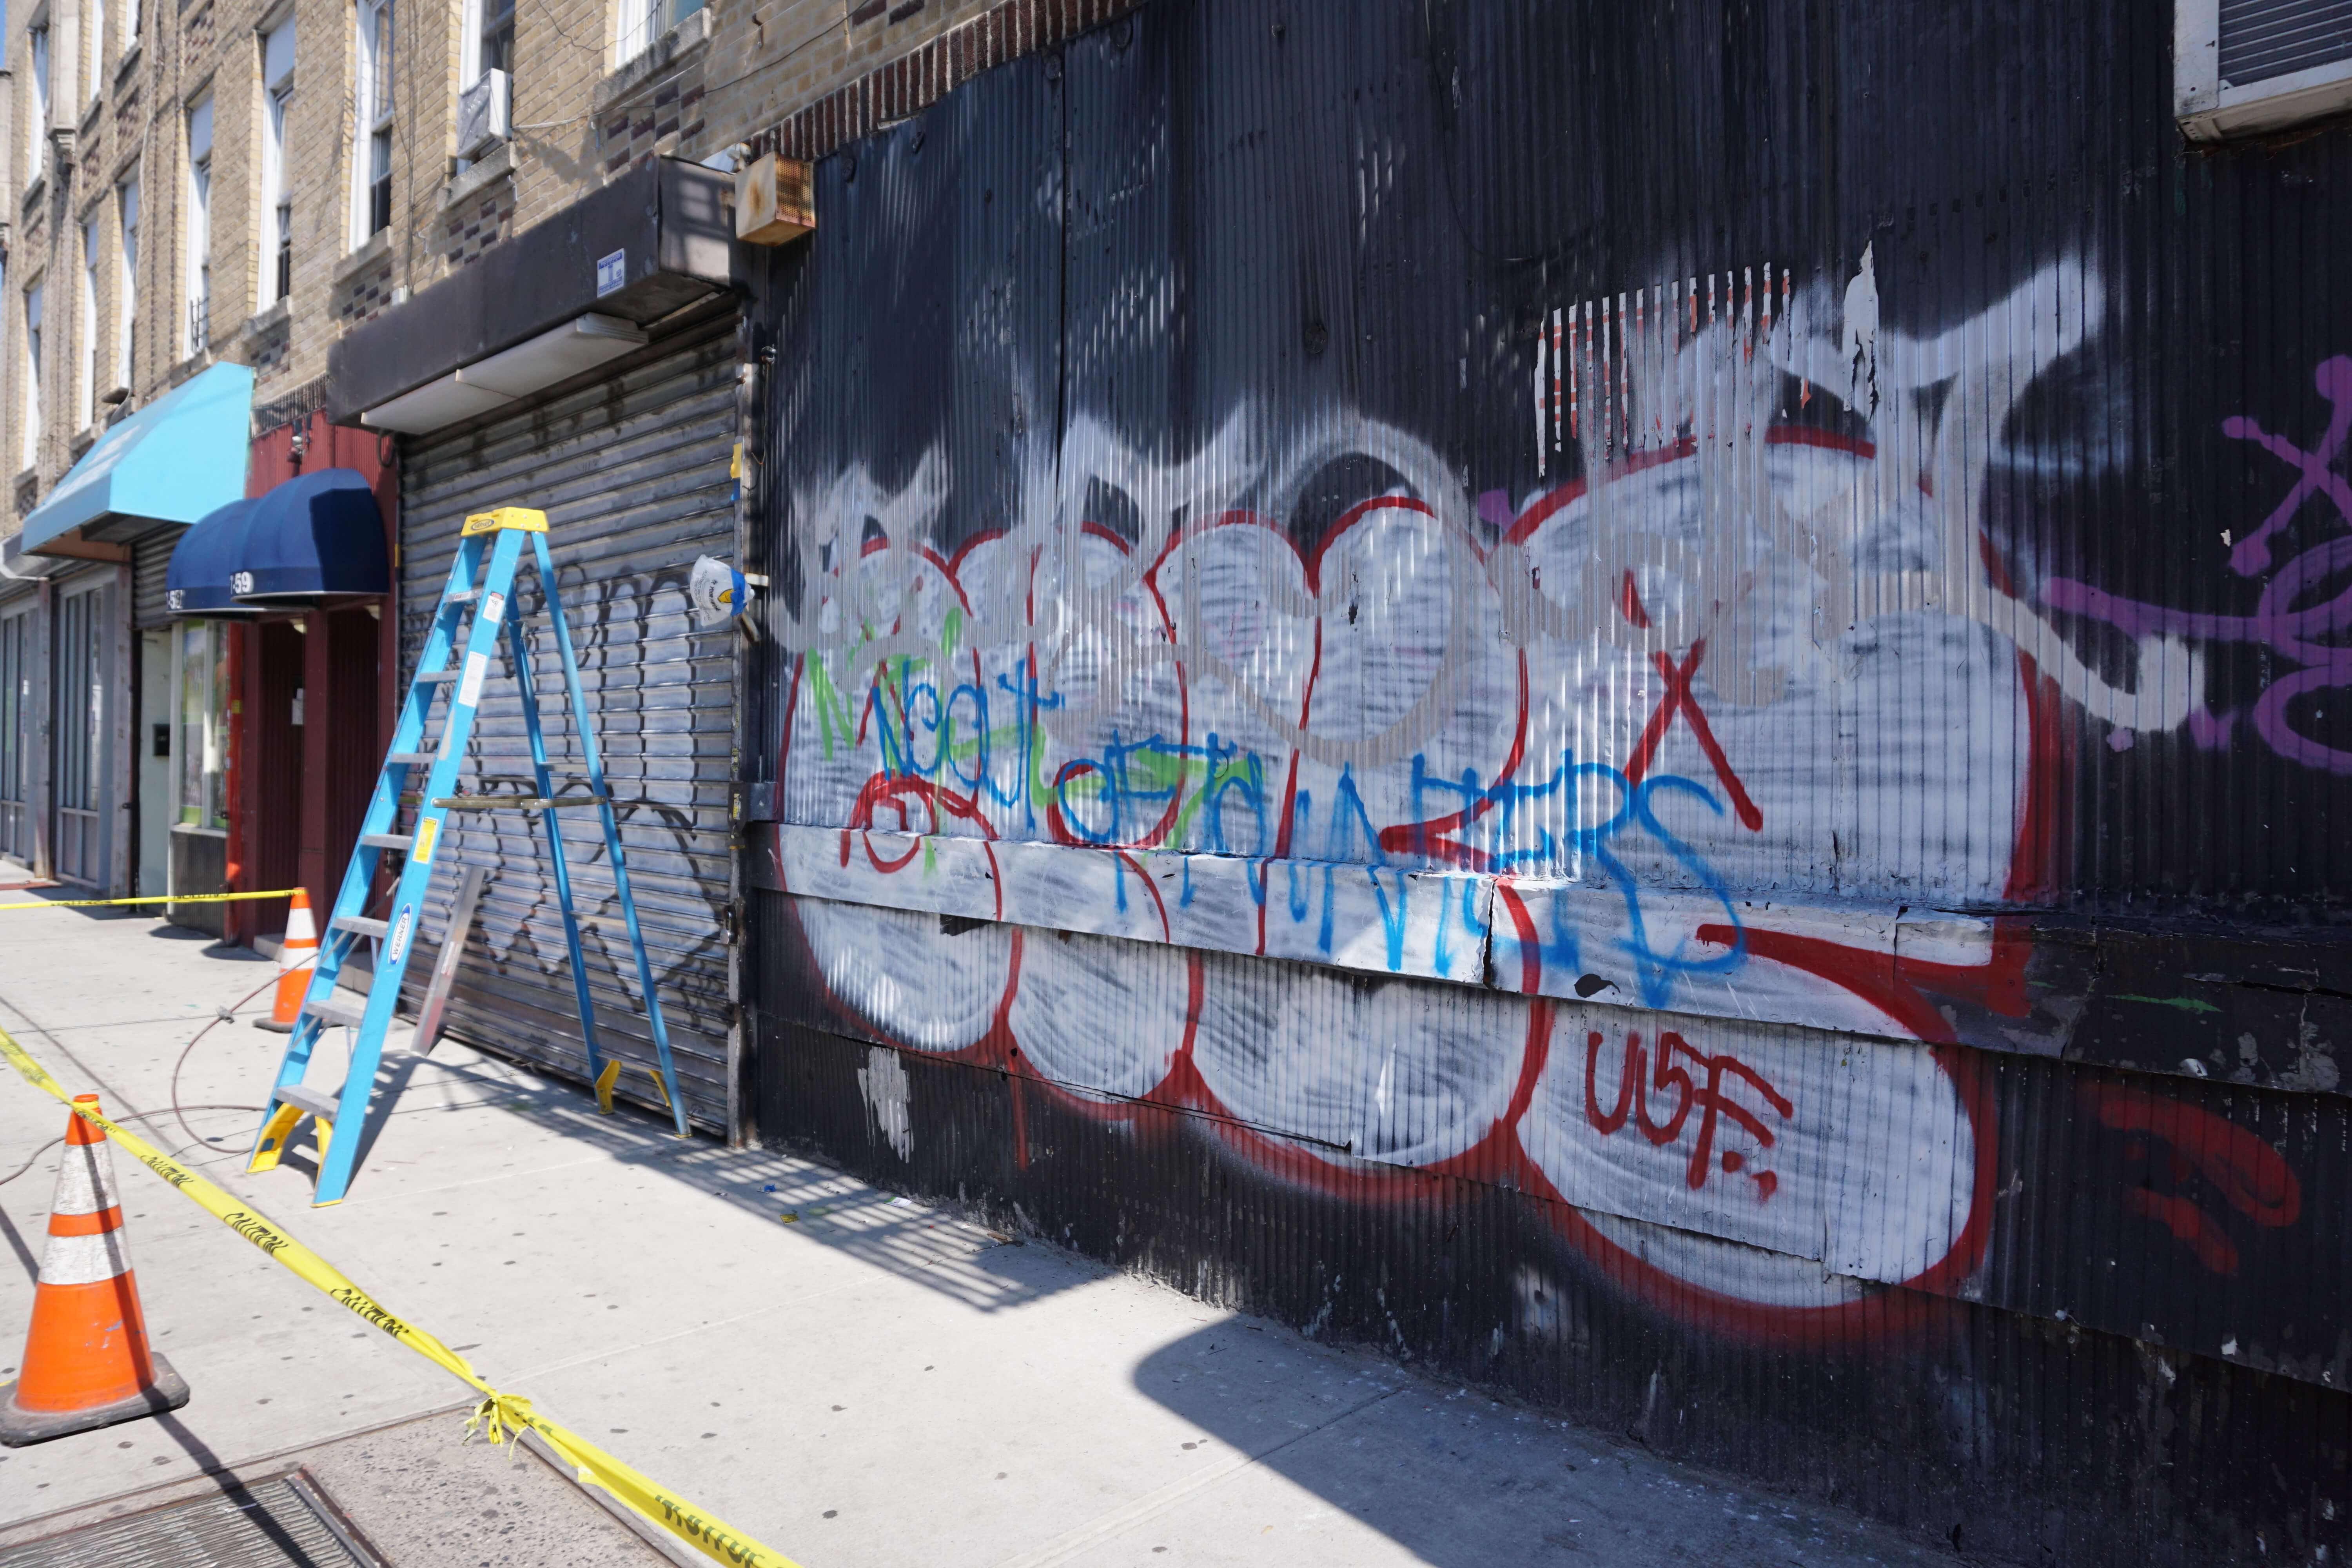 Now you see it, now you don’t: City goes on a graffiti removal blitz ...